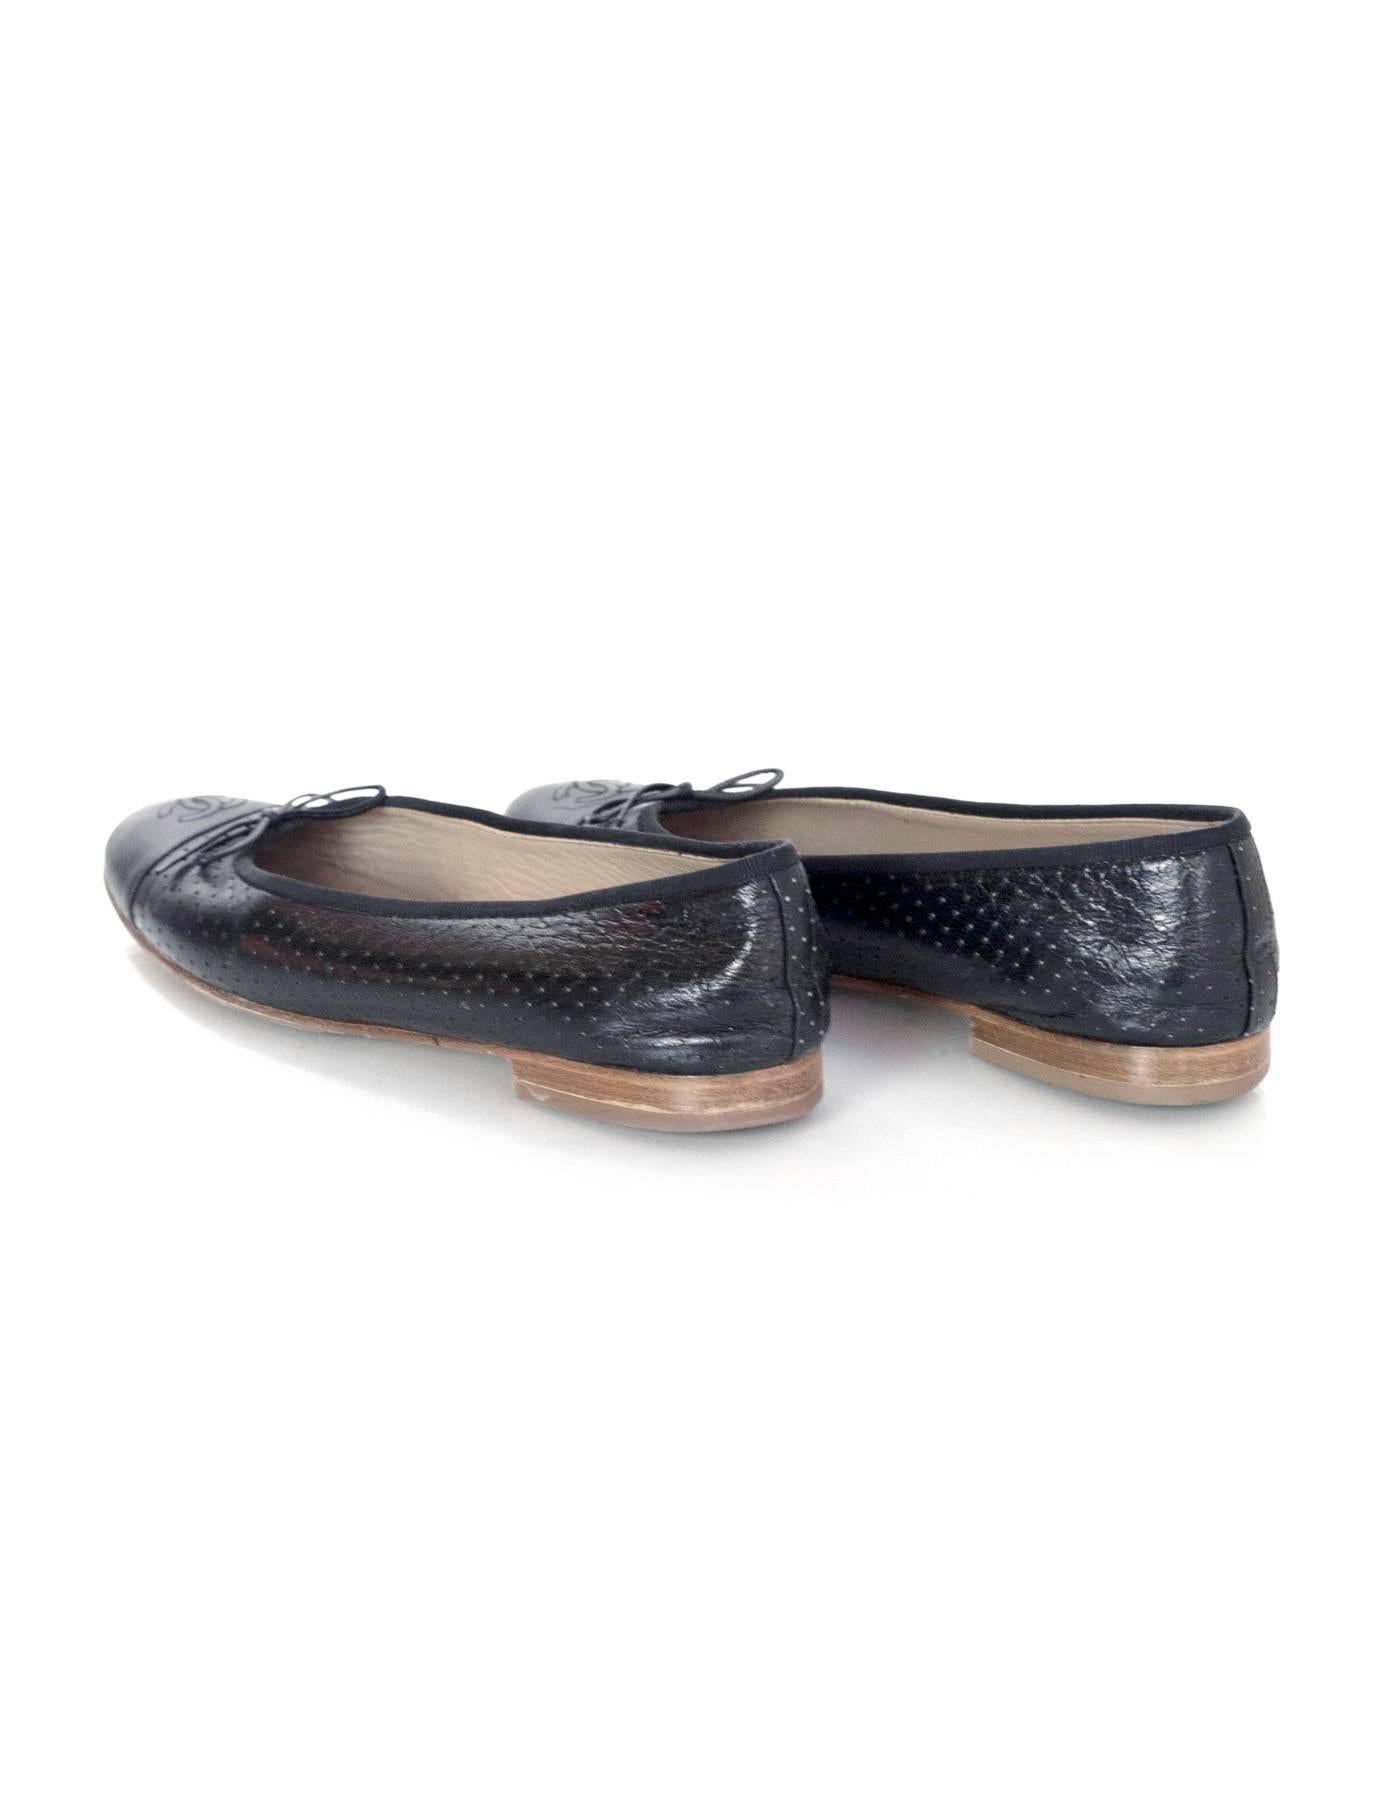 Chanel Black Leather Perforated Ballet Flats sz 41.5 1